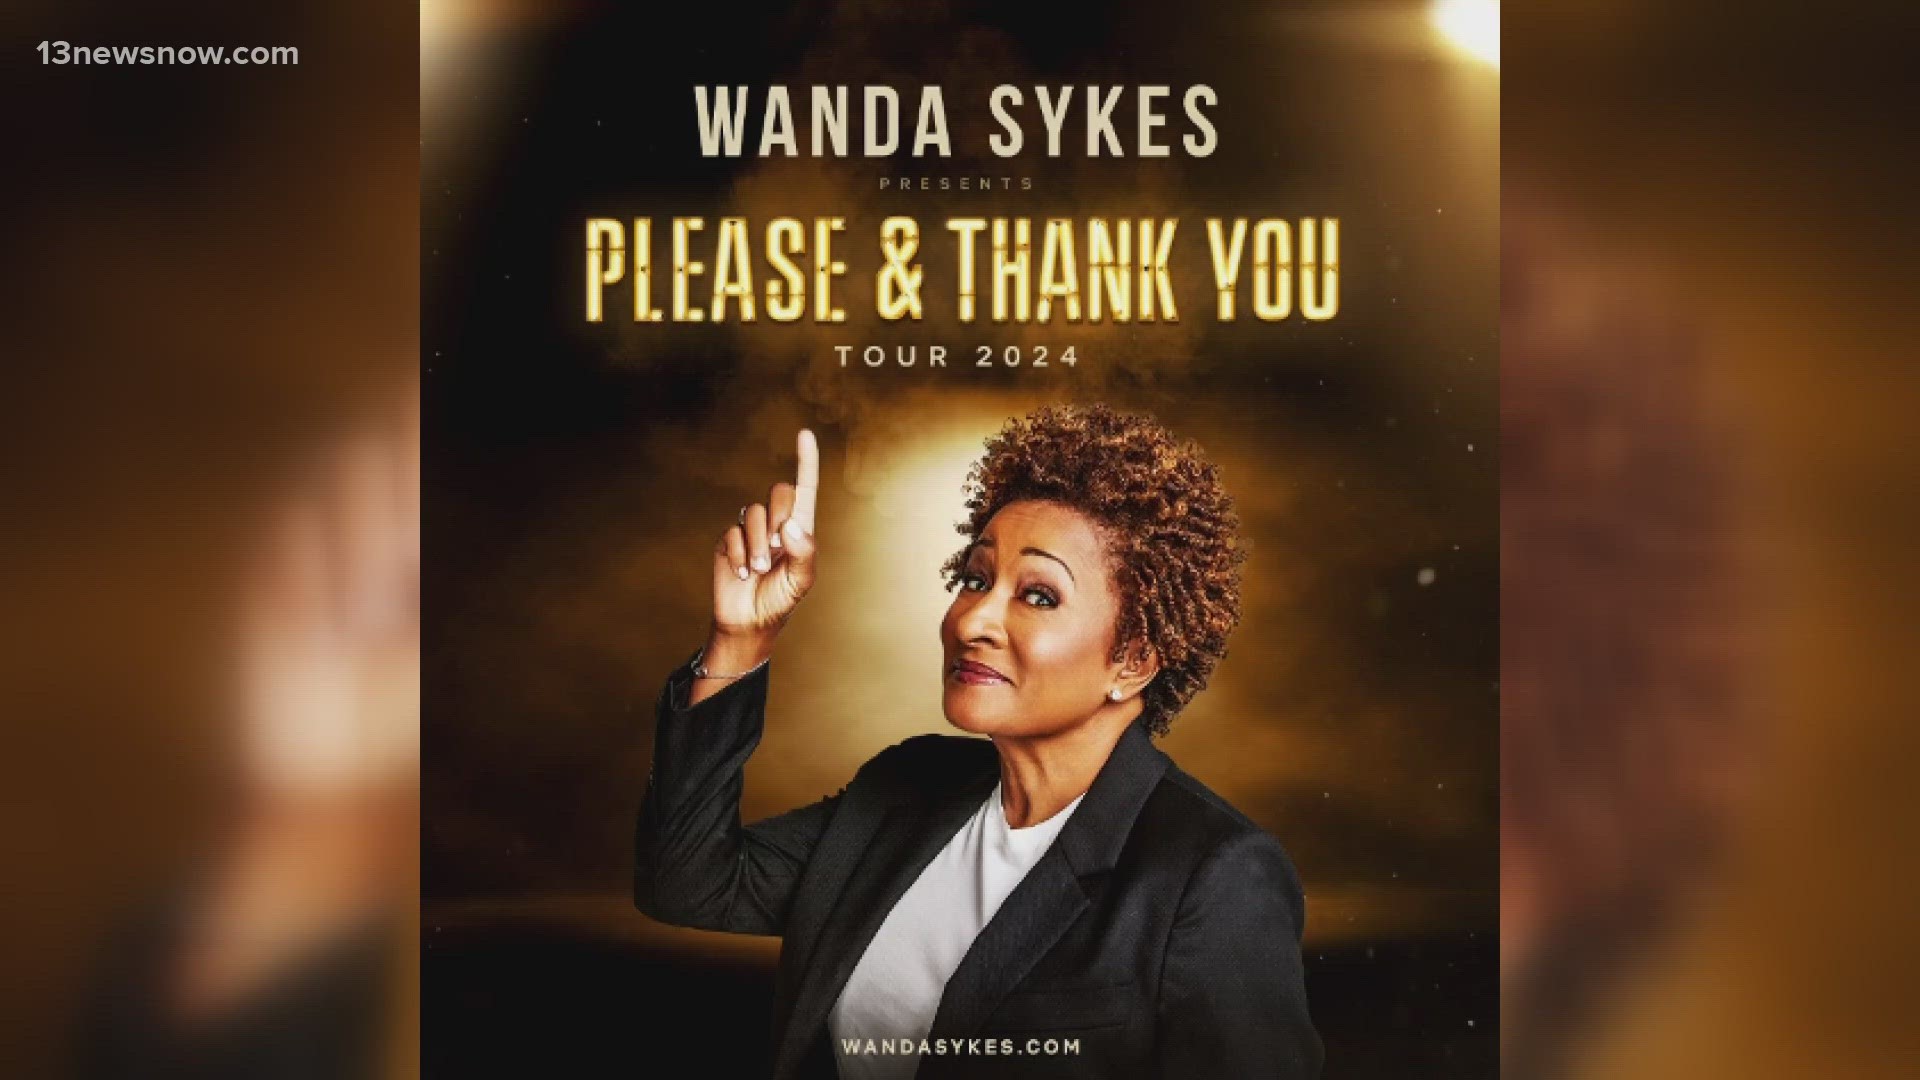 Comedian Wanda Sykes will perform as part of her "Please & Thank You" tour at Norfolk's Chrysler Hall on Friday, March 15, 2024.